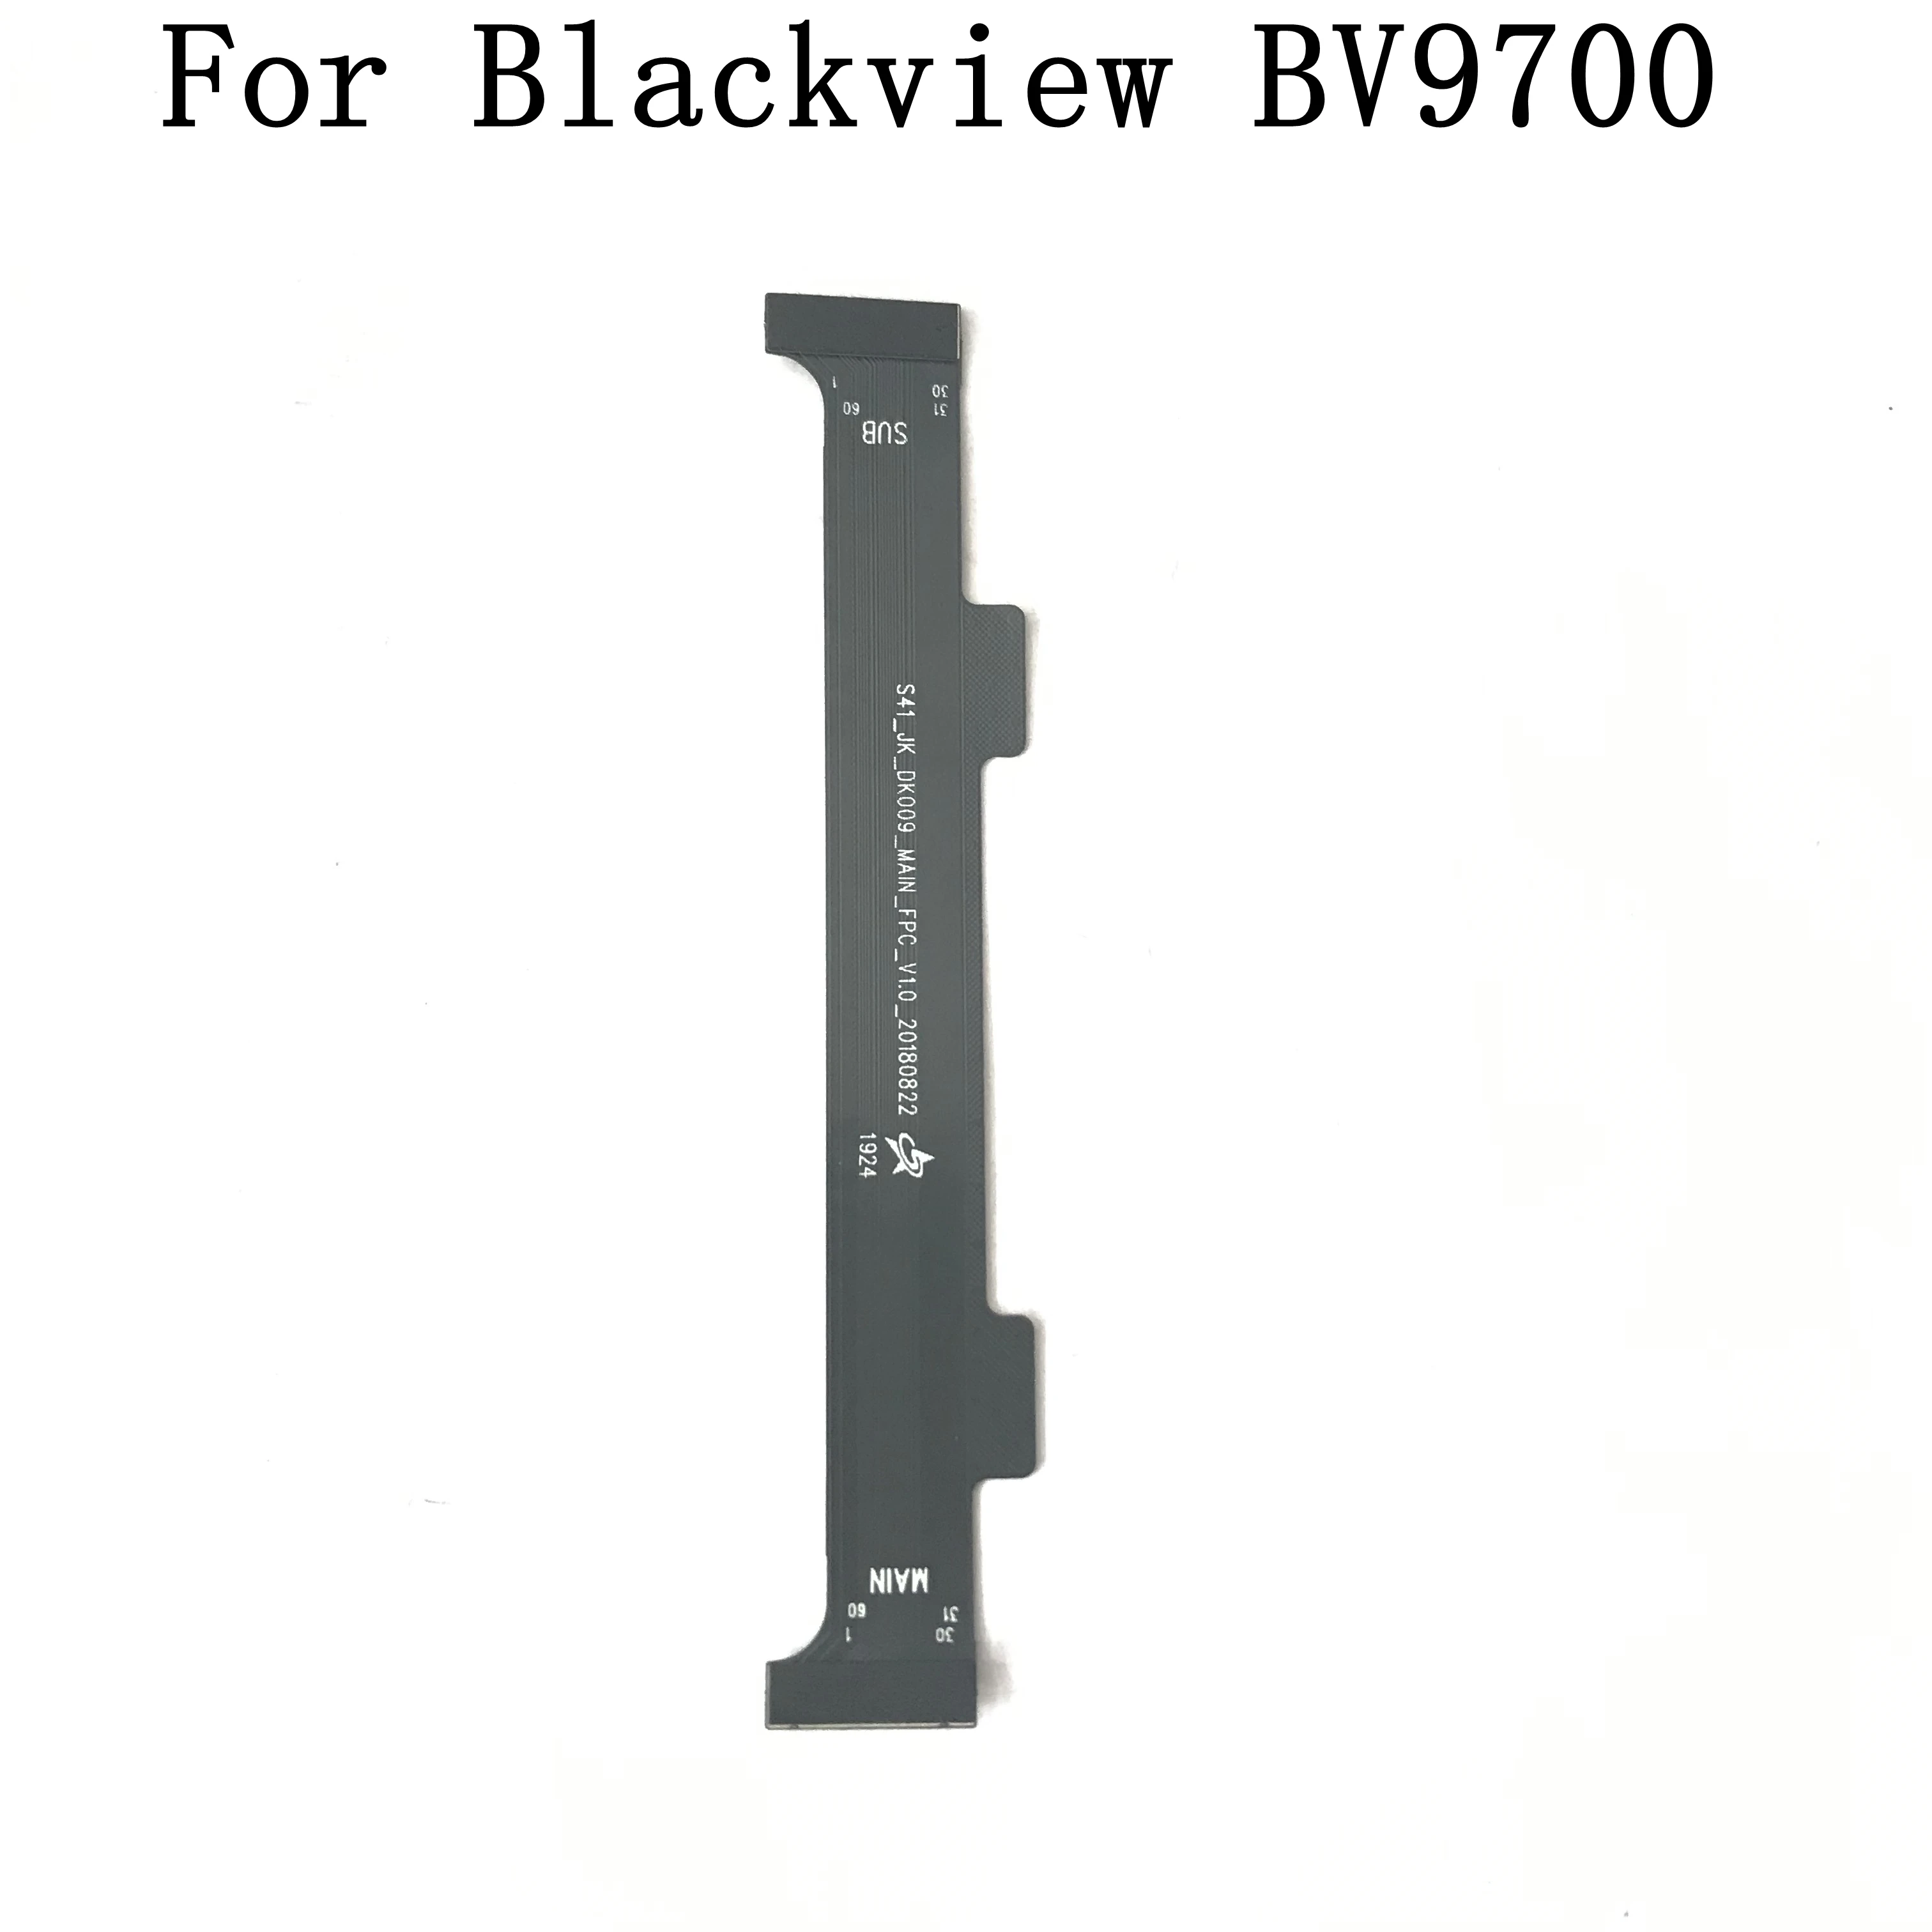 

Blackview BV9700 New USB Charge Board to Motherboard FPC For Blackview BV9700 Pro MTK6771T 5.84inch 2280*1080 Smartphone